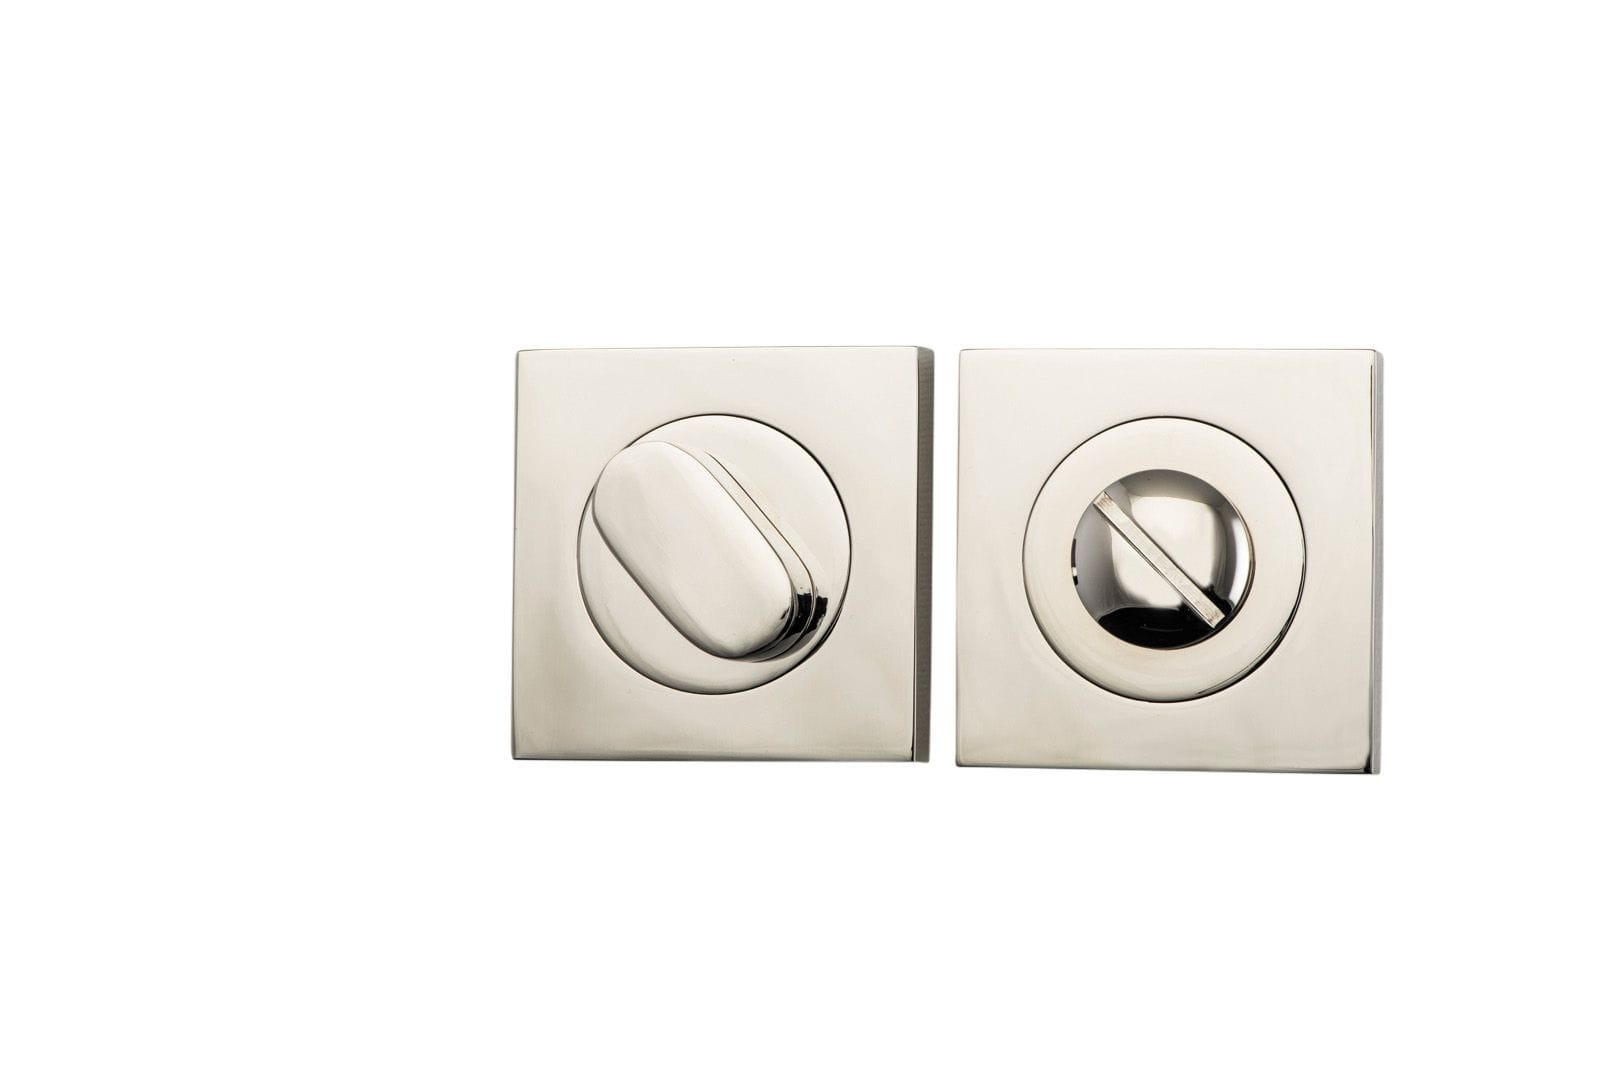 Privacy Turn Square Polished Nickel